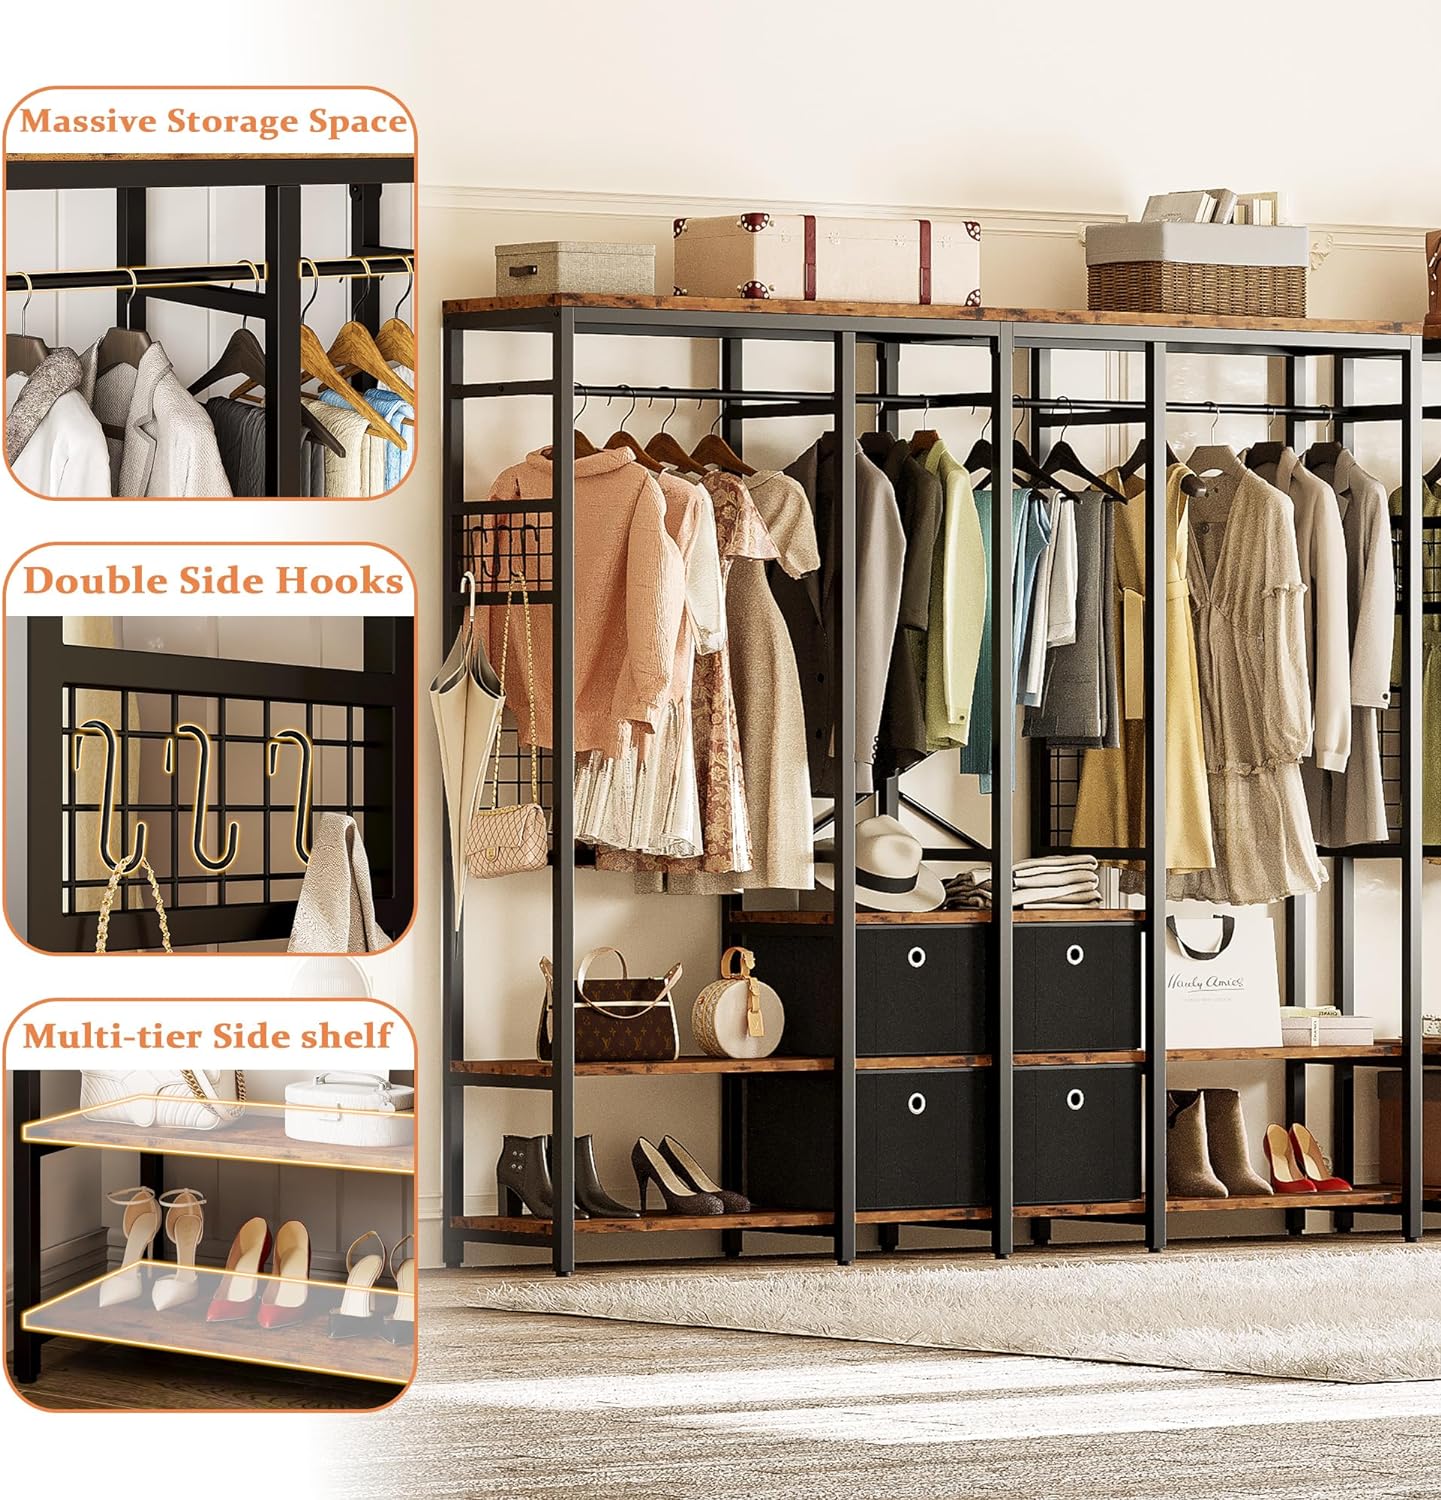 Brown Free-standing Closet Organizer Garment Rack with Double Hanging Rod